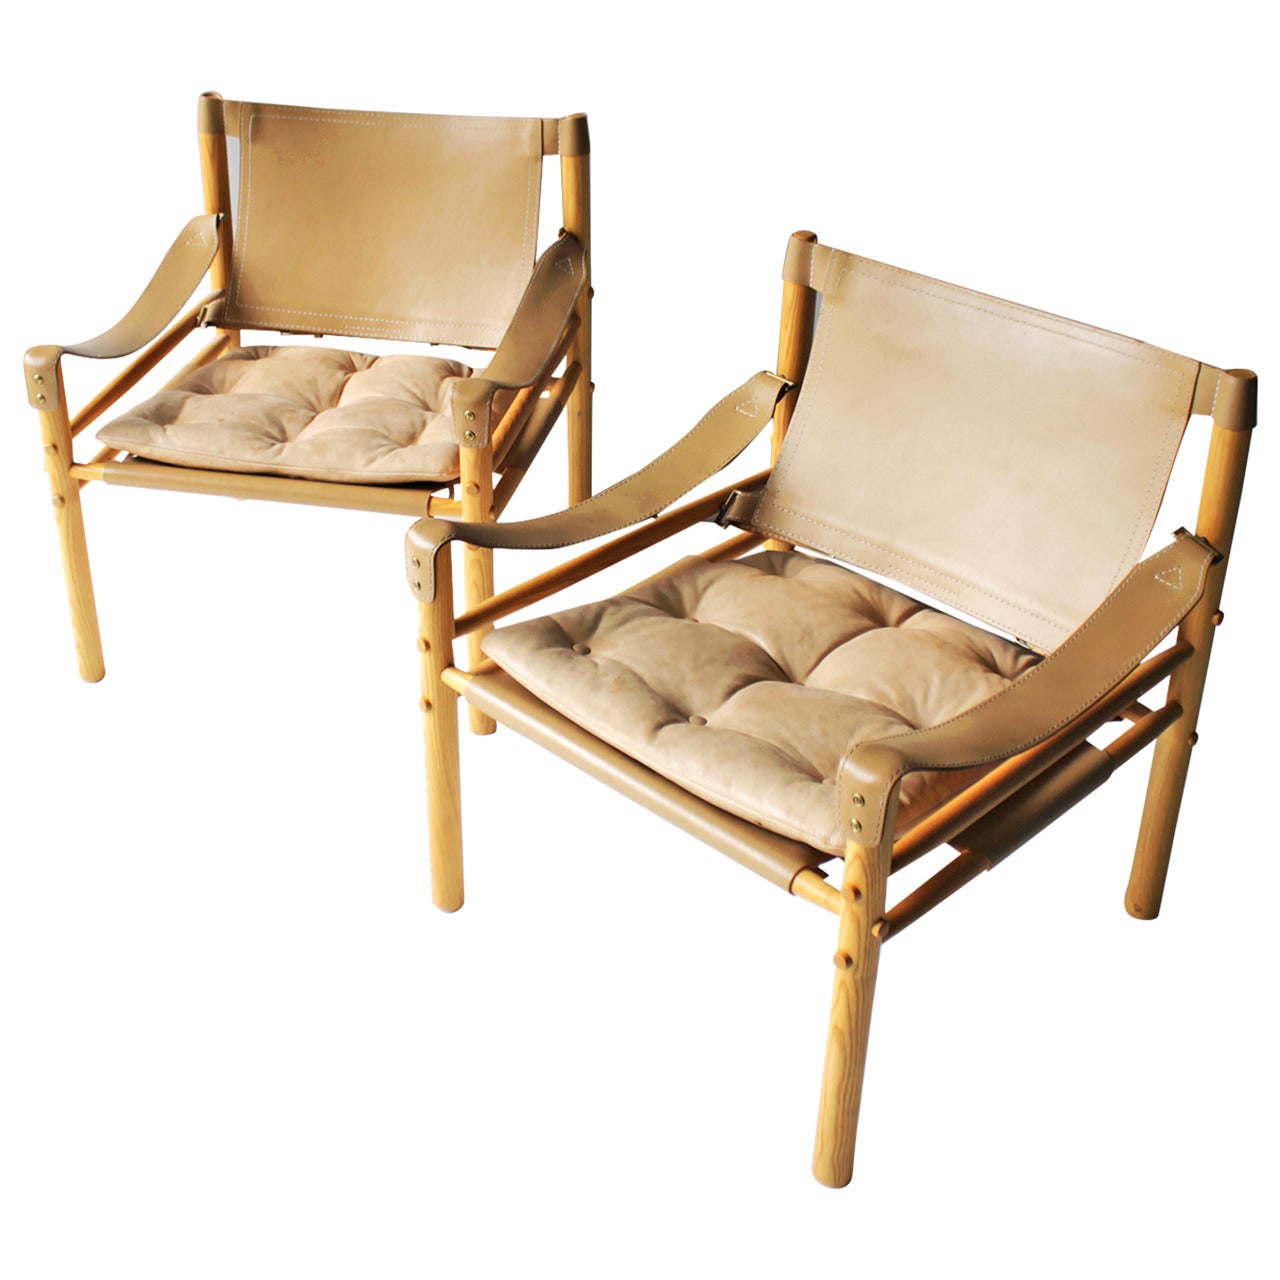 Pair of 'Scirocco' Safari Chairs by Arne Norell